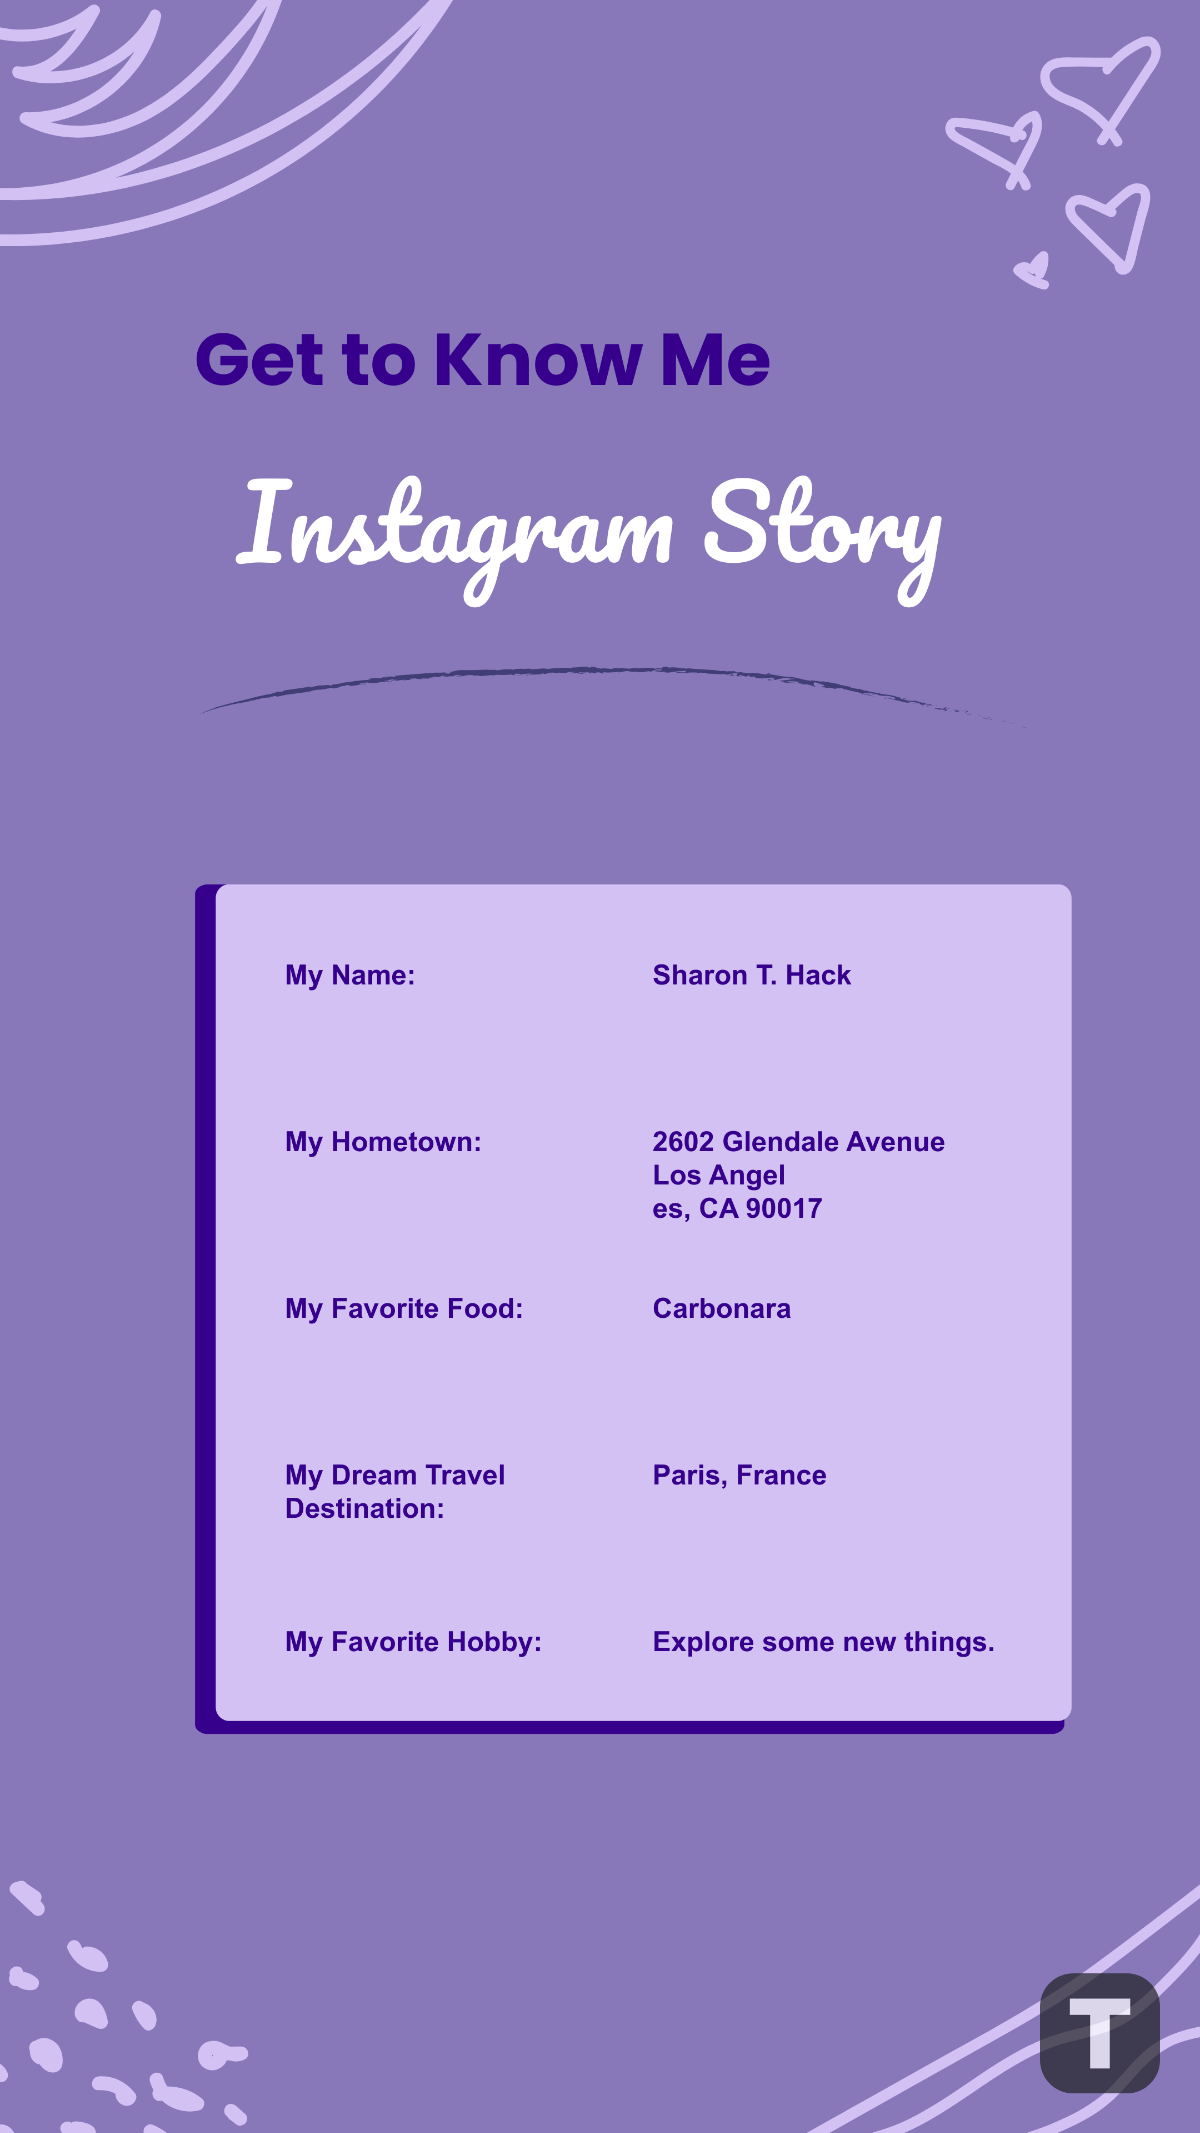 Get to Know Me Template For Your Next Instagram Story